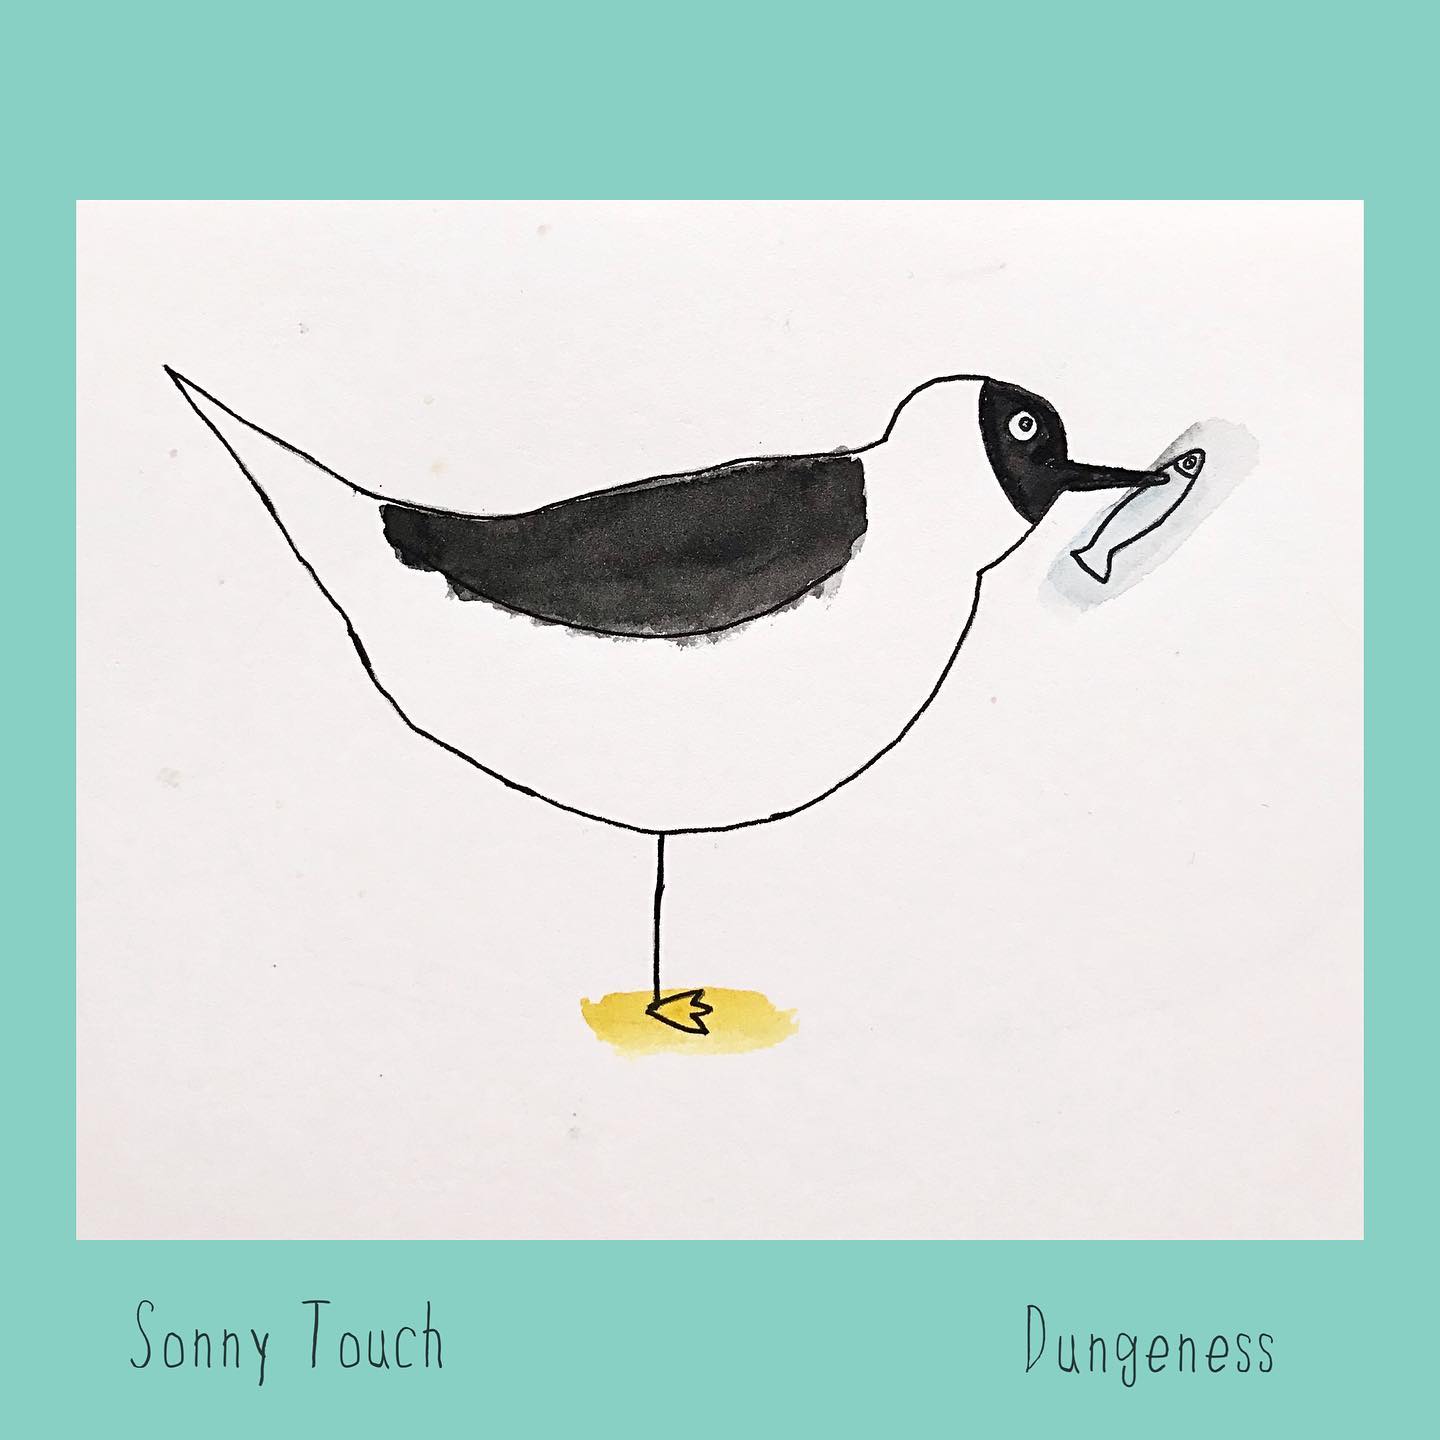 Cover of the album Dungeness, Sonny Touch